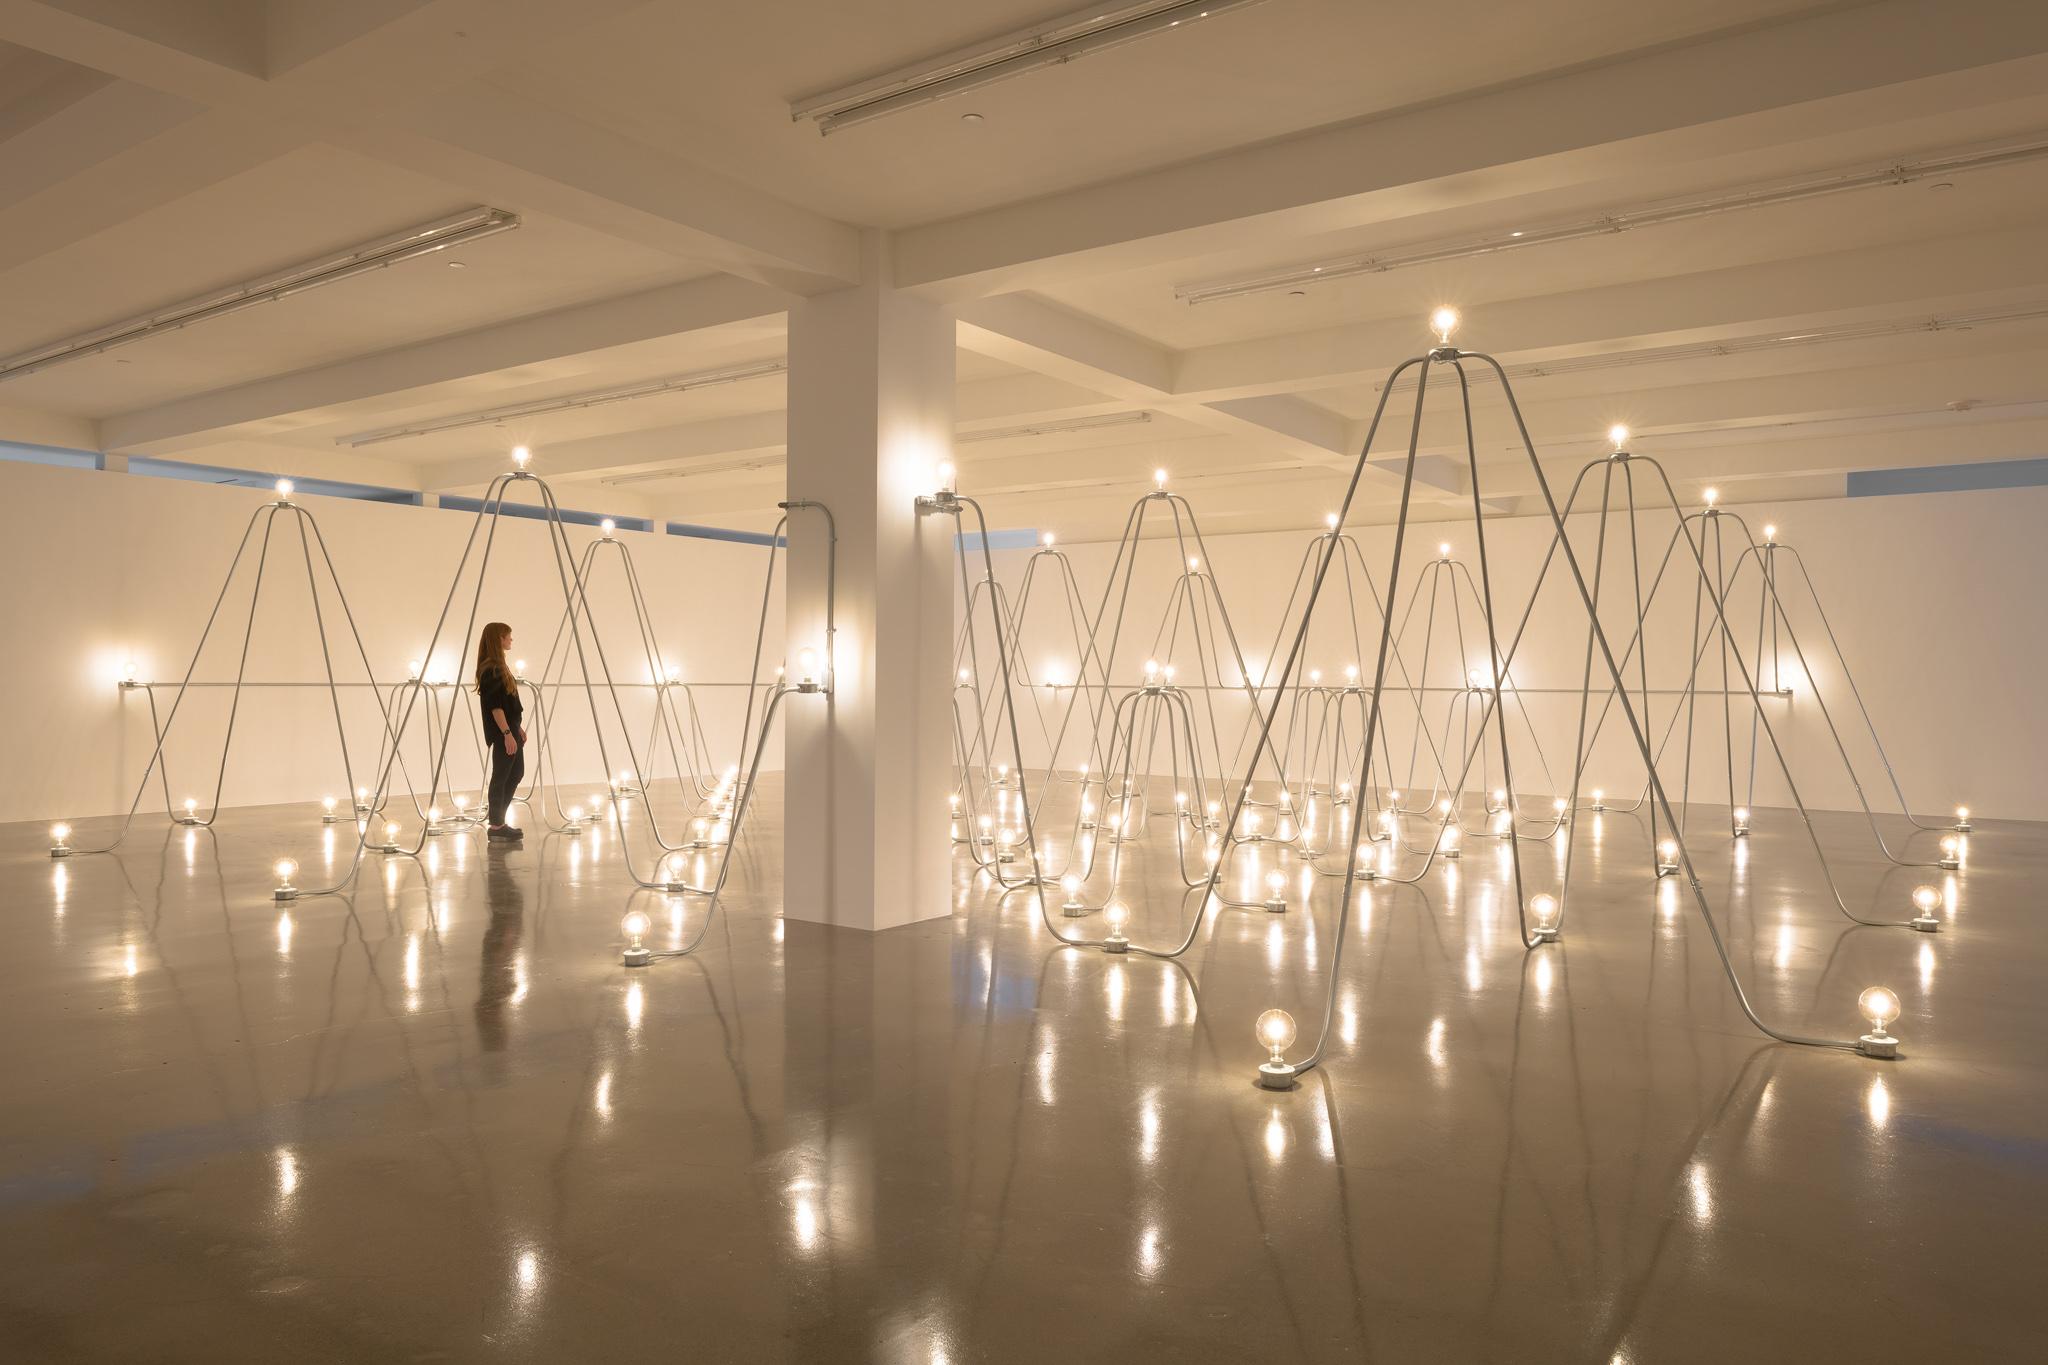 A person standing inside Nancy Holt's Electrical System at Sprueth Magers LA